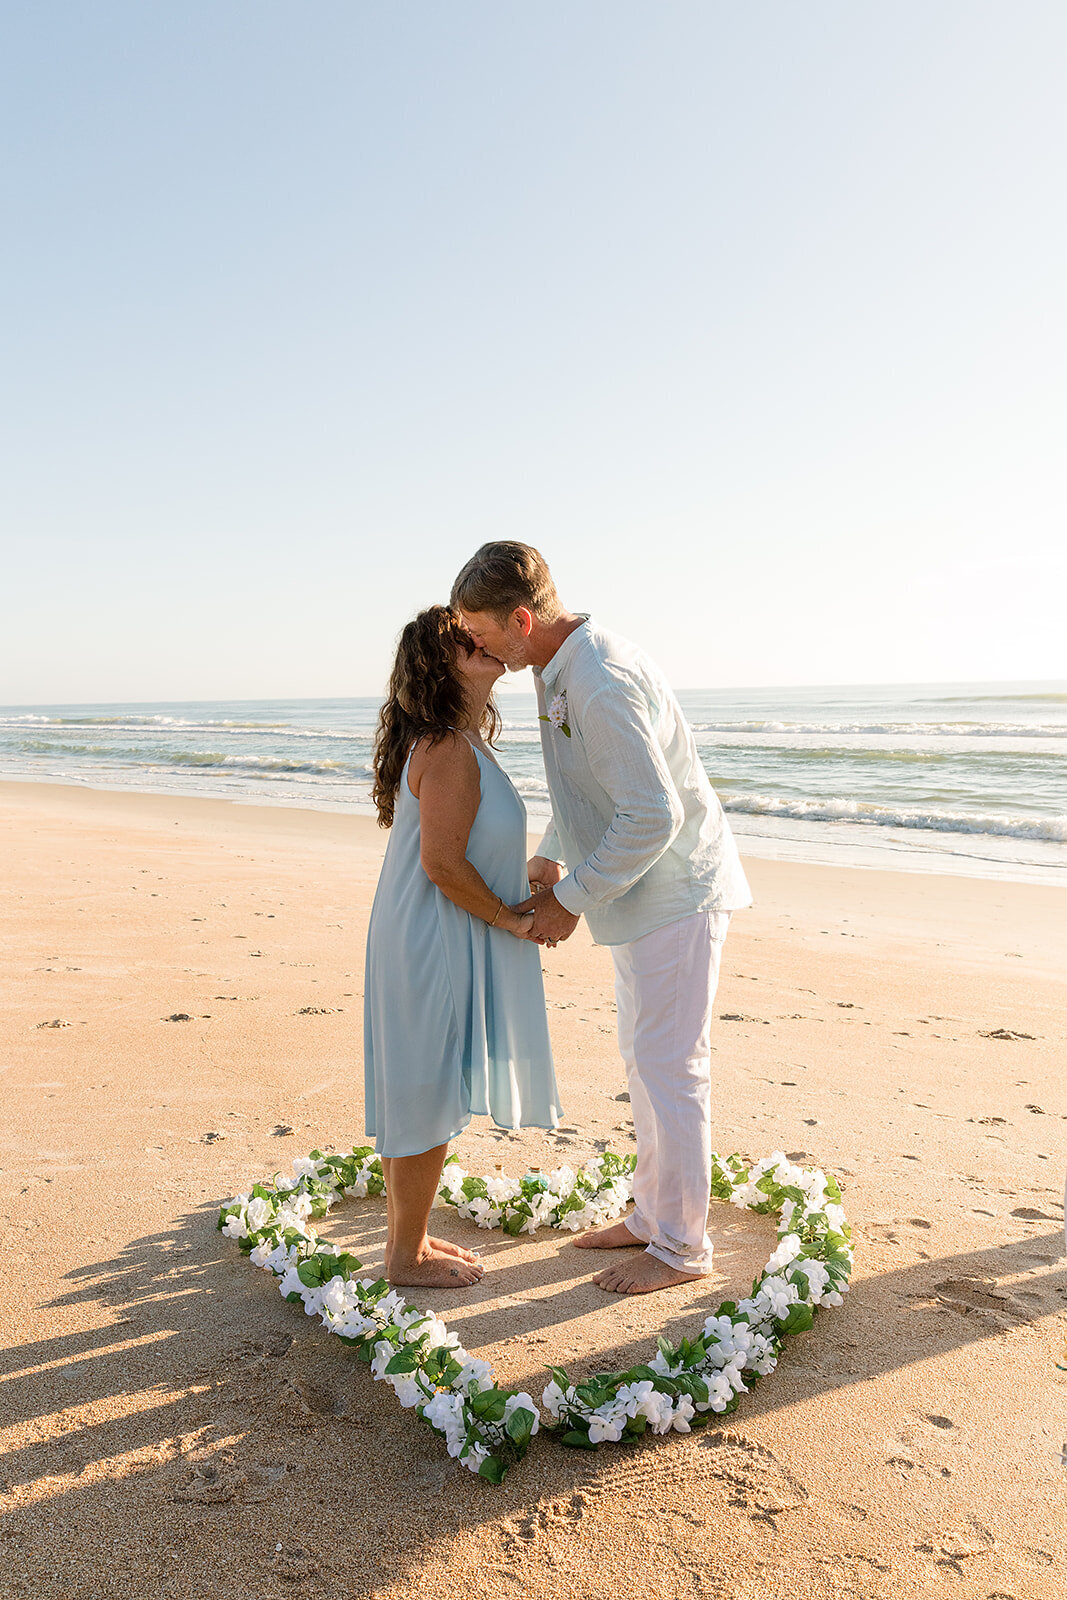 eloping at sunrise on the beach